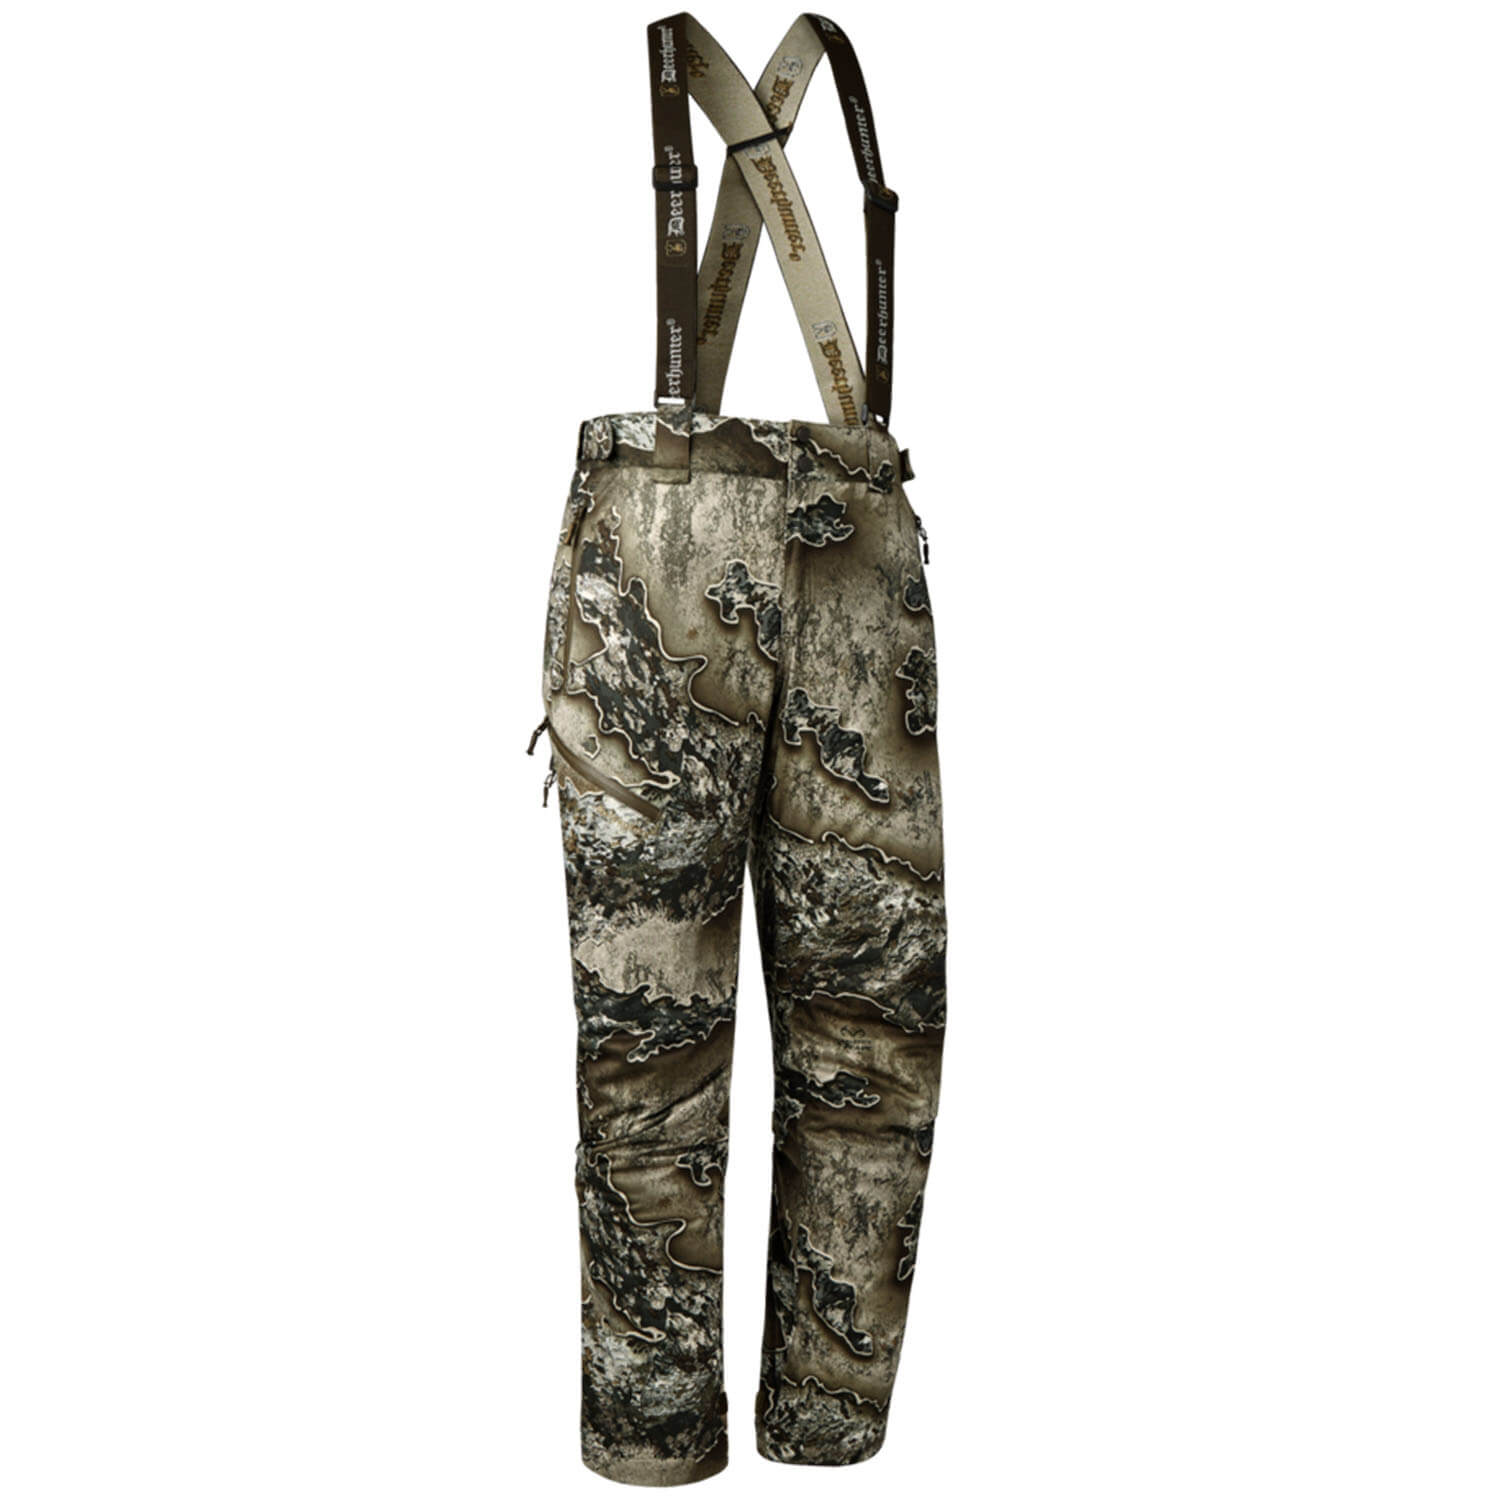 Deerhunter winter trousers Excape (realtree excape) - Camouflage Trousers